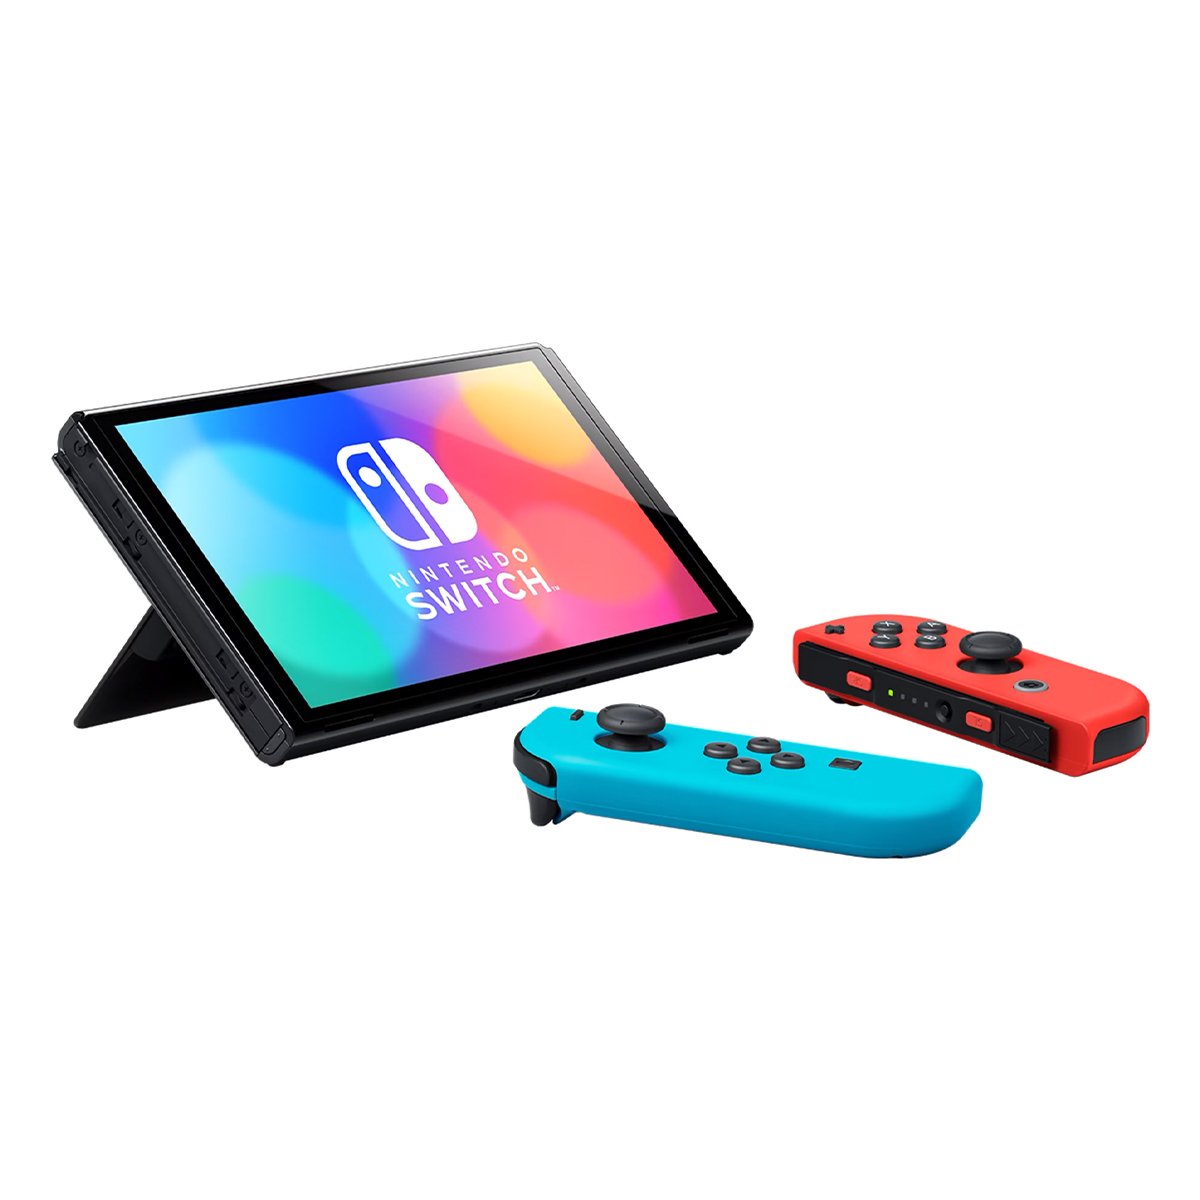 Nintendo Switch OLED Model -Neon Blue/Neon Red + 3 Games Pack. Deadly premonition + the princess Guide + demonex.